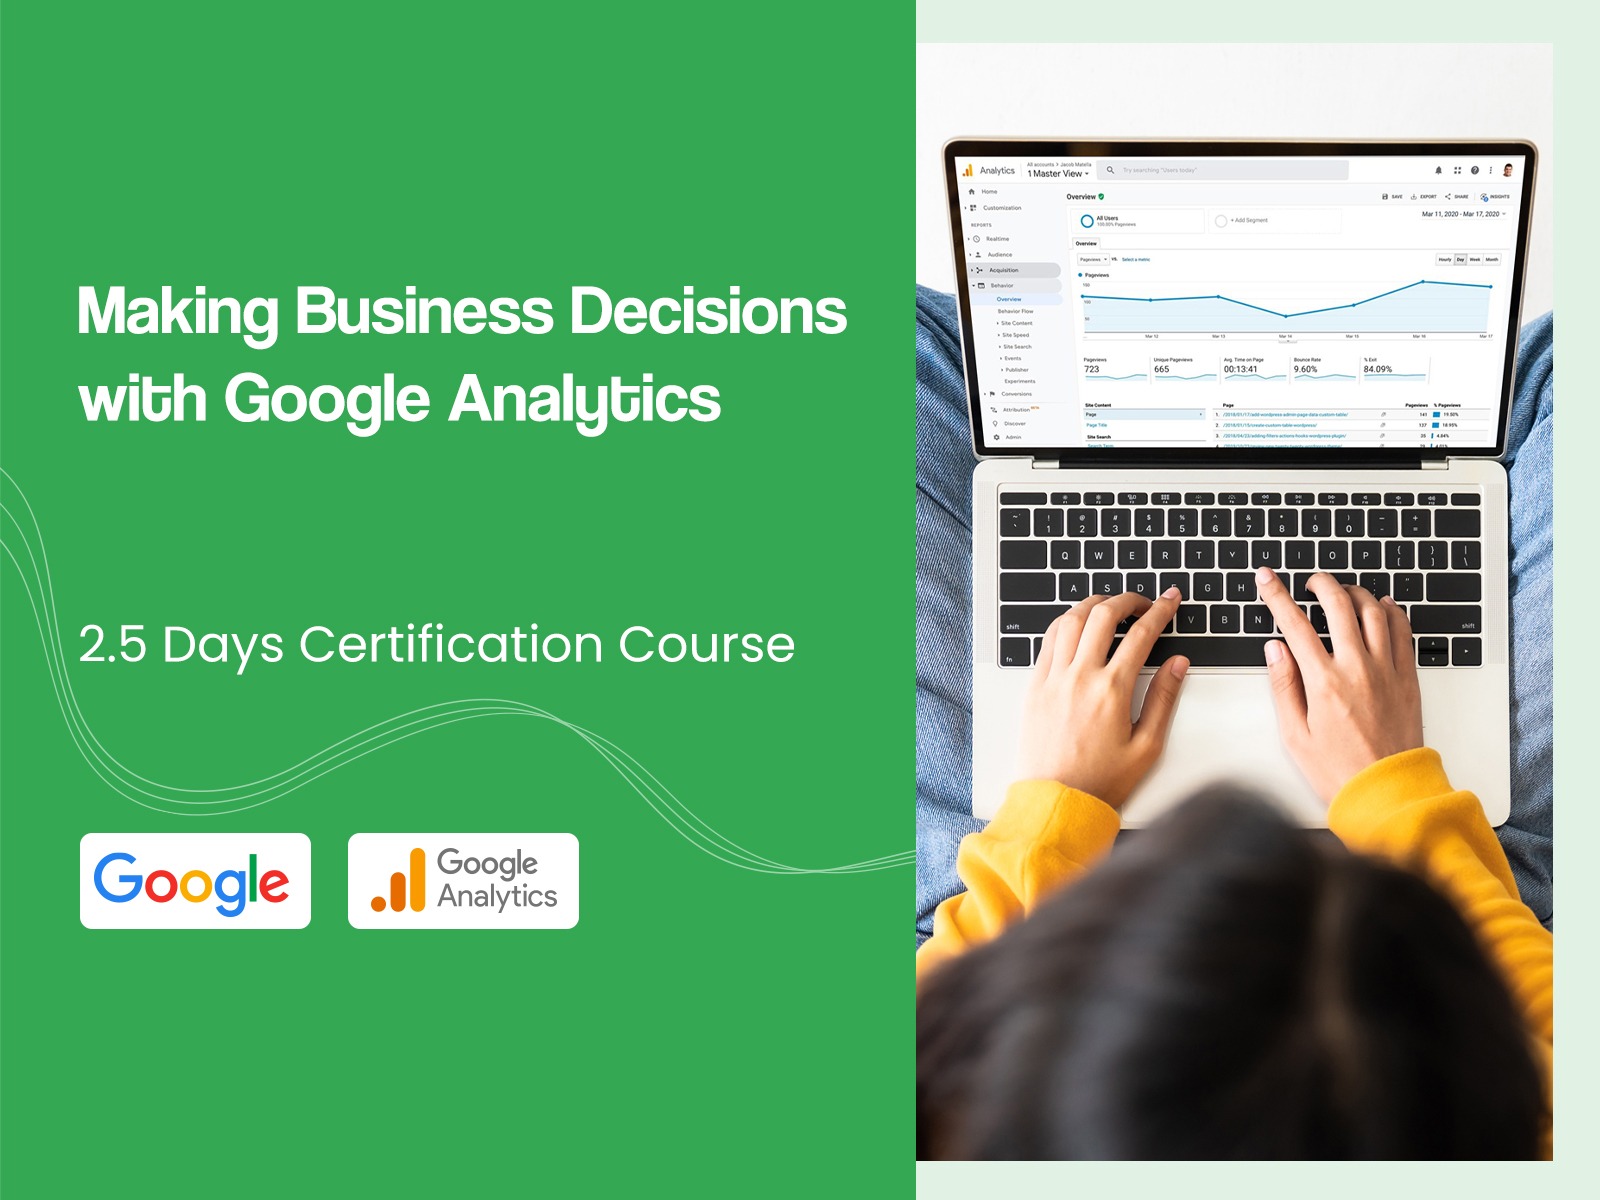 Making Business Decisions with Google Analytics course in Singapore